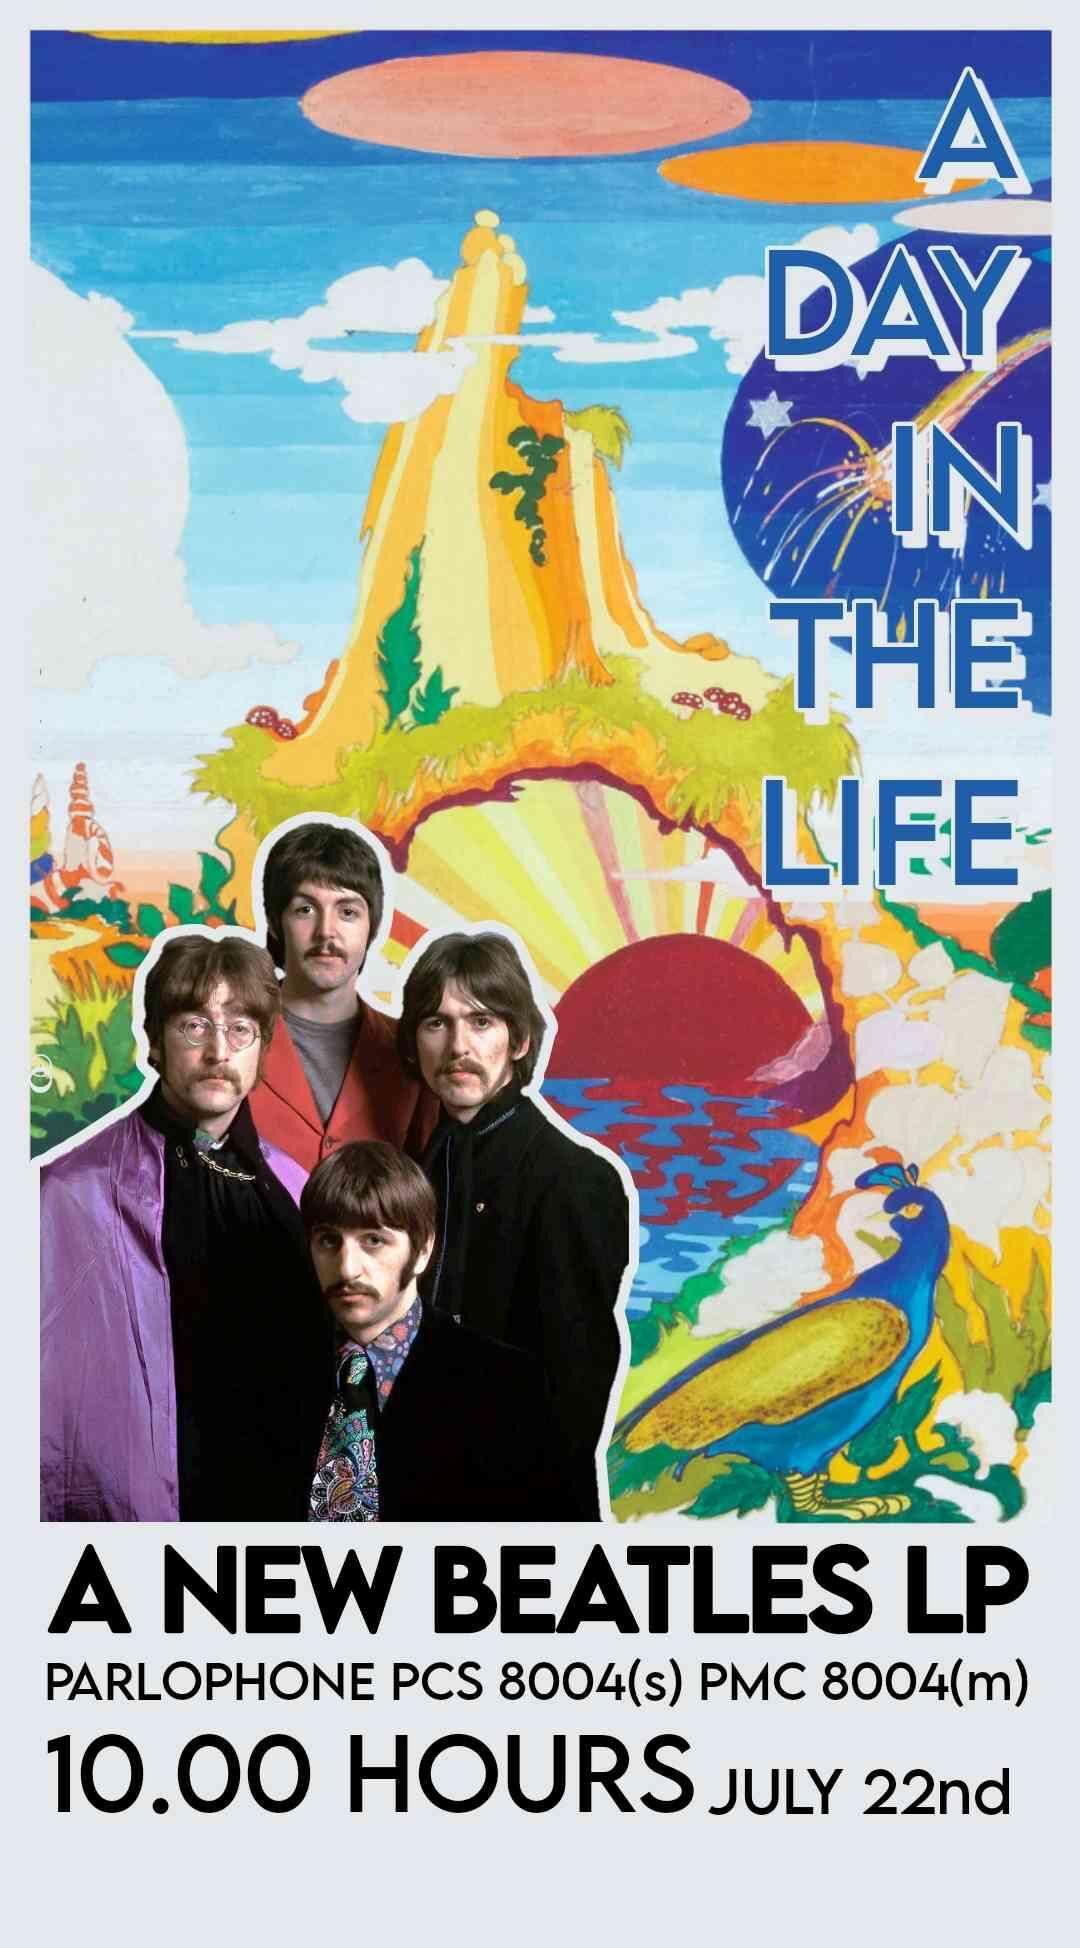 The Beatles: A Day in the Life (Music Video 1967) - IMDb